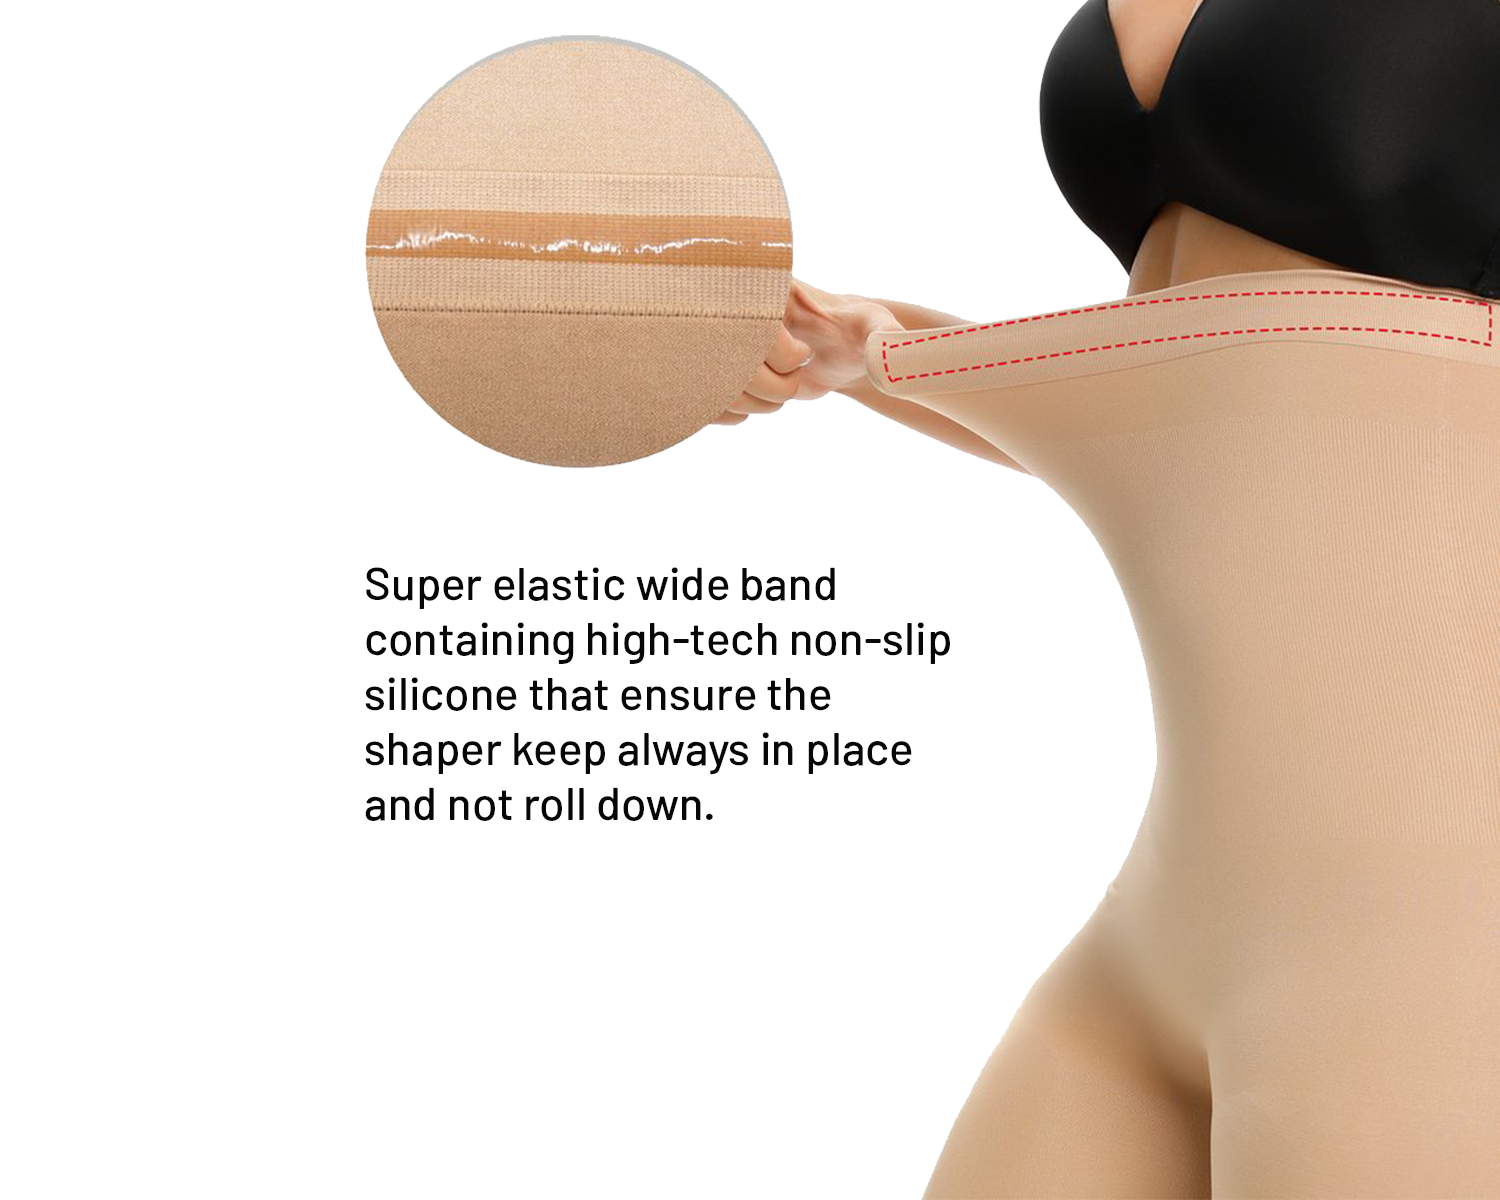 Spanx - Item That You Desired - Aliexpress - Shop high-quality spanx